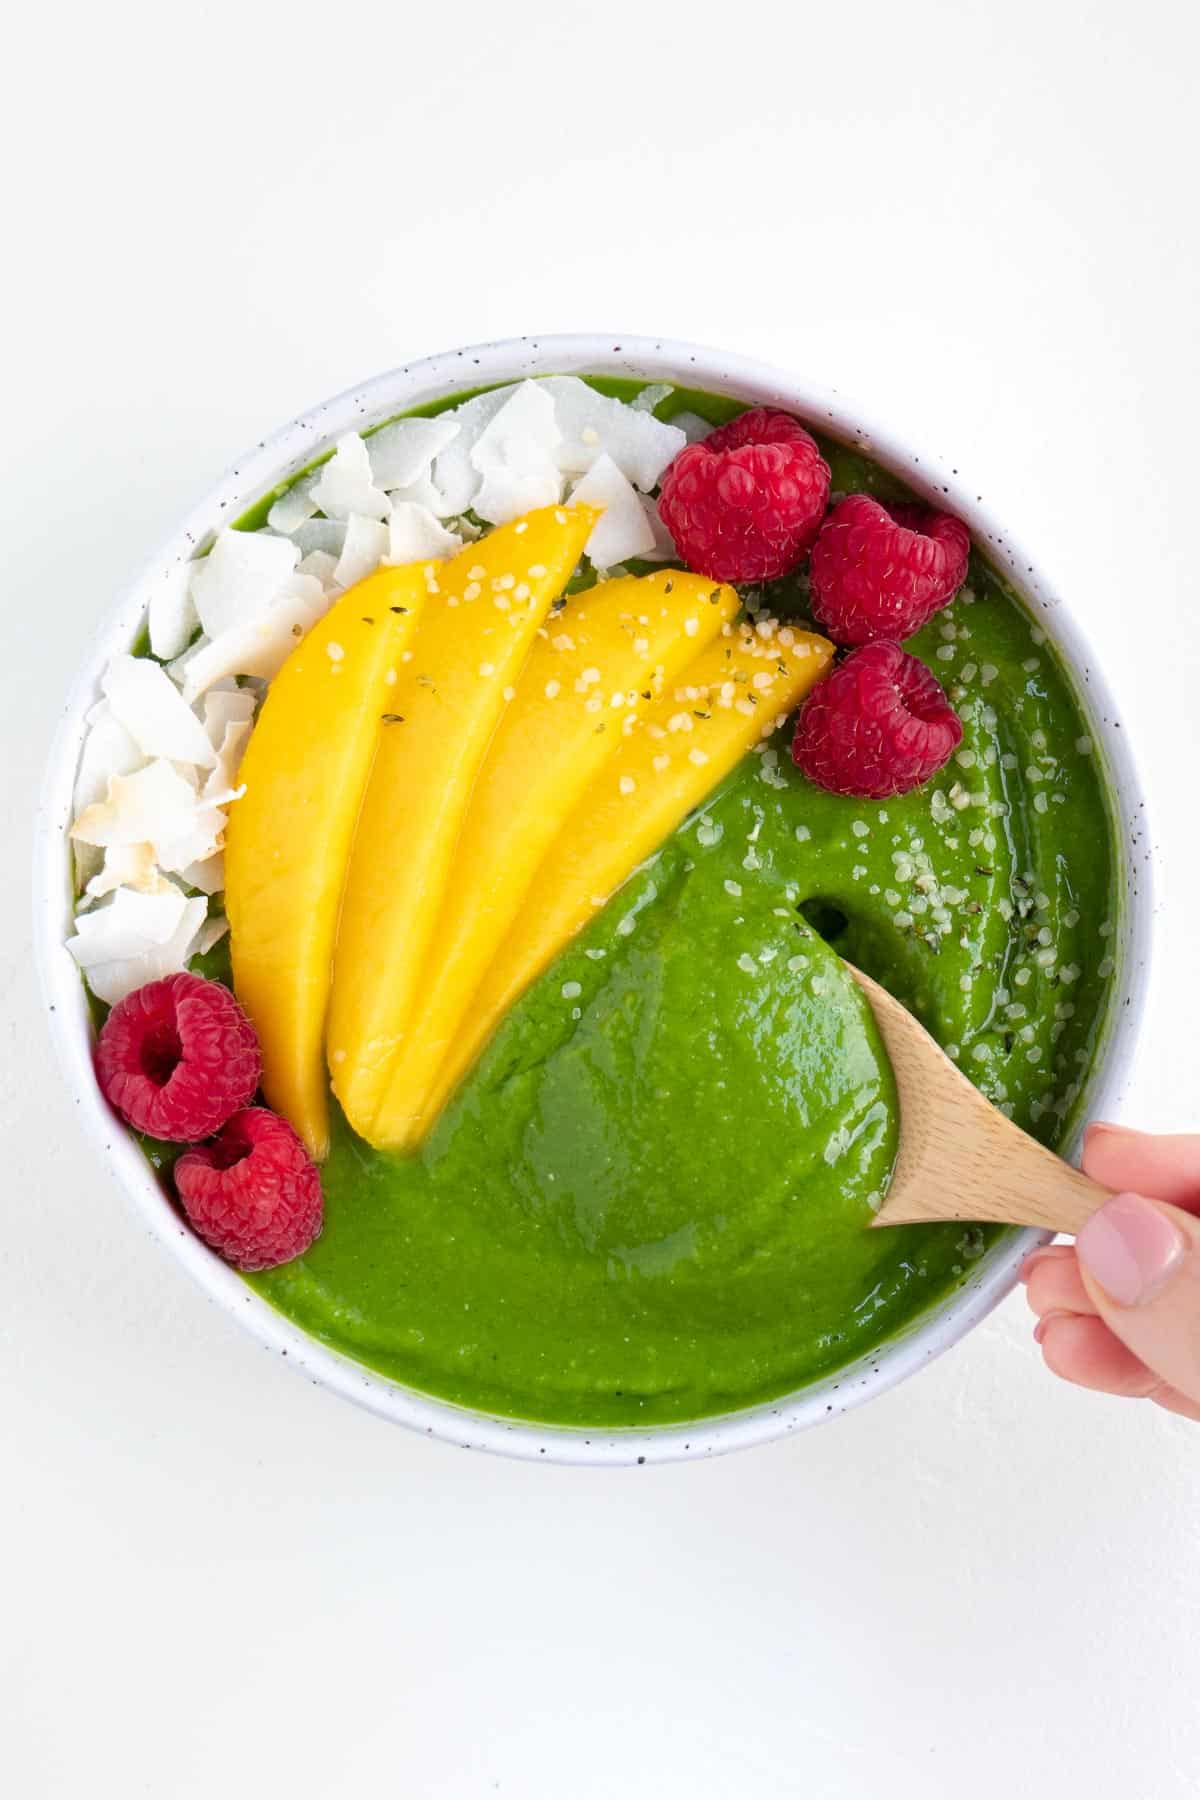 a hand holding a wooden spoon scooping a bite out of a smoothie bowl